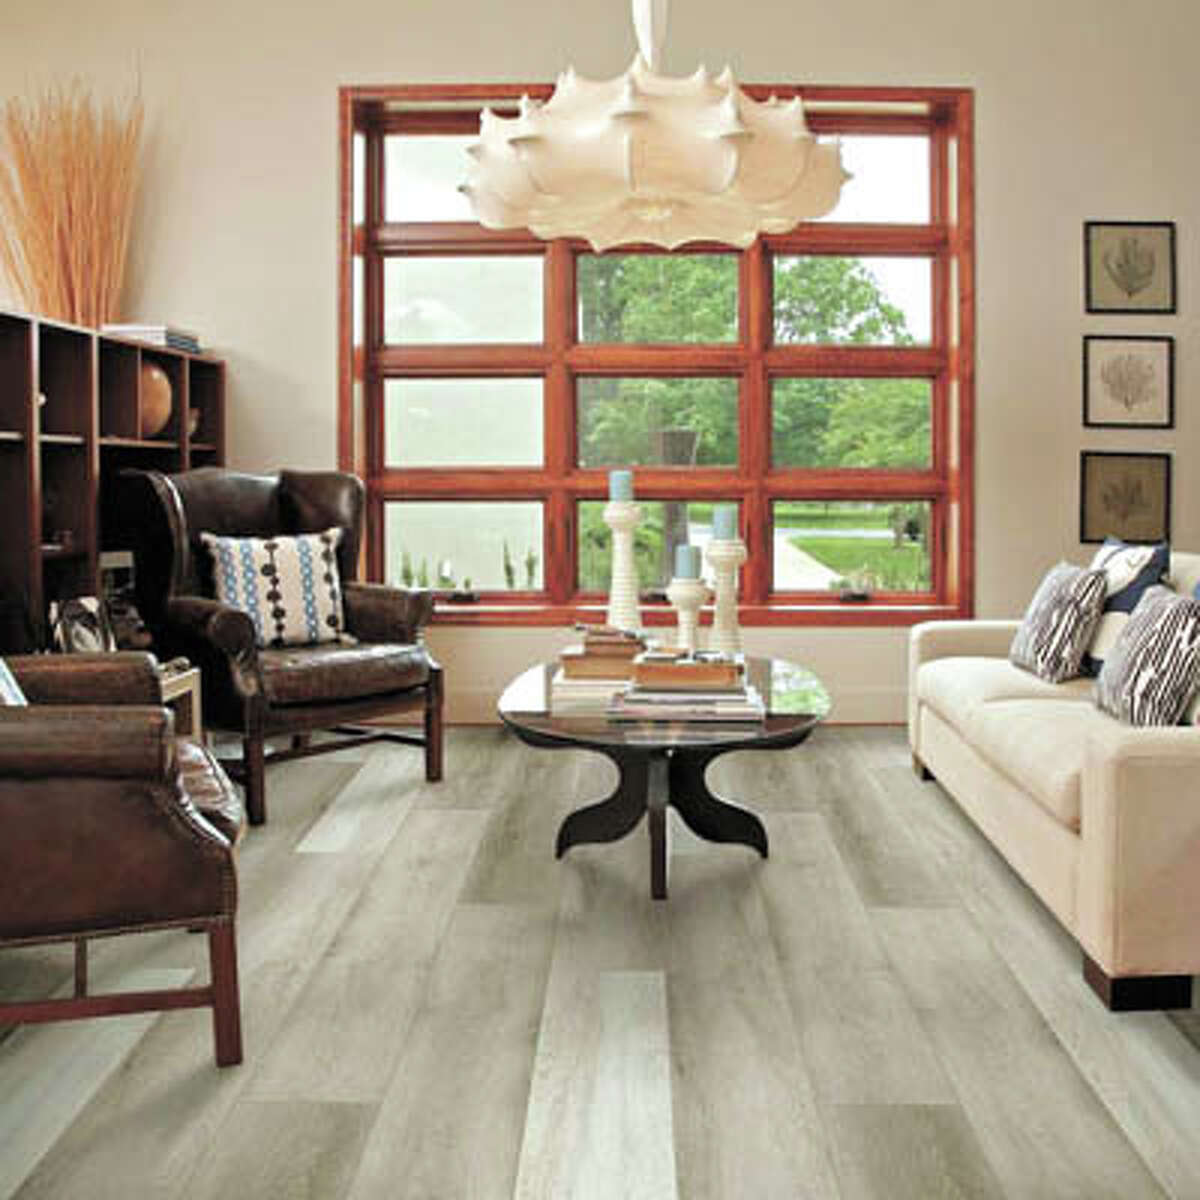 Get the deep, rich aura of wood in every room? Looks like it! With Floorté vinyl plank flooring from Shaw, at Southwest Floors, 1113 Andrews Highway in Midland.